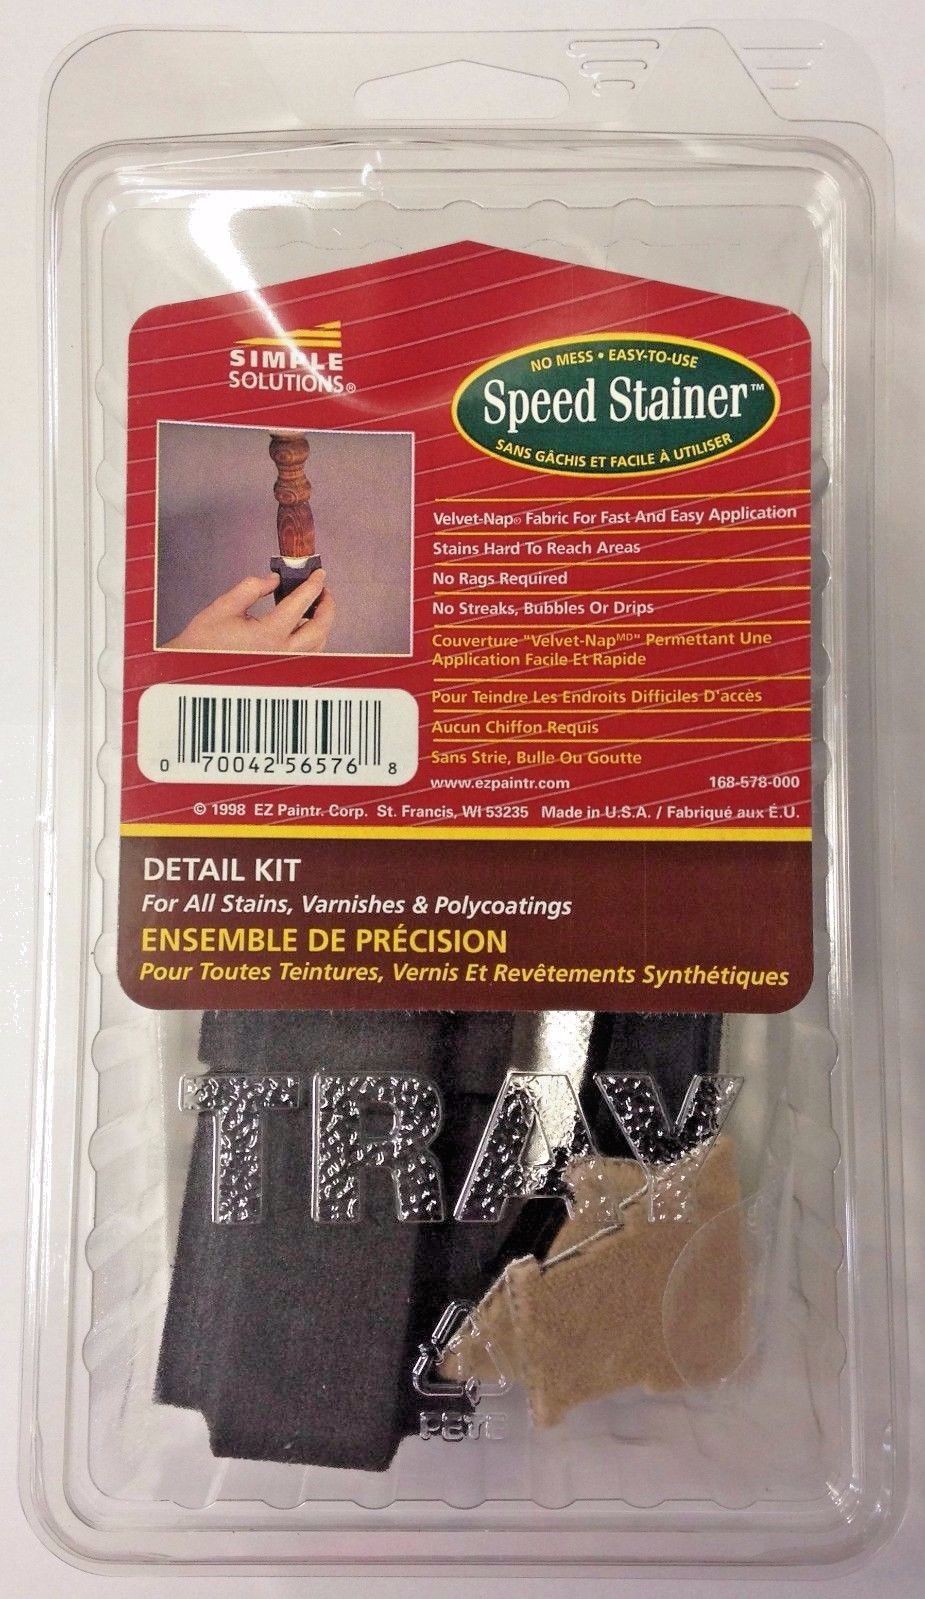 Simple Solutions Speed Stainer Detail Kit For Stains, Varnishes, & Polycoatings